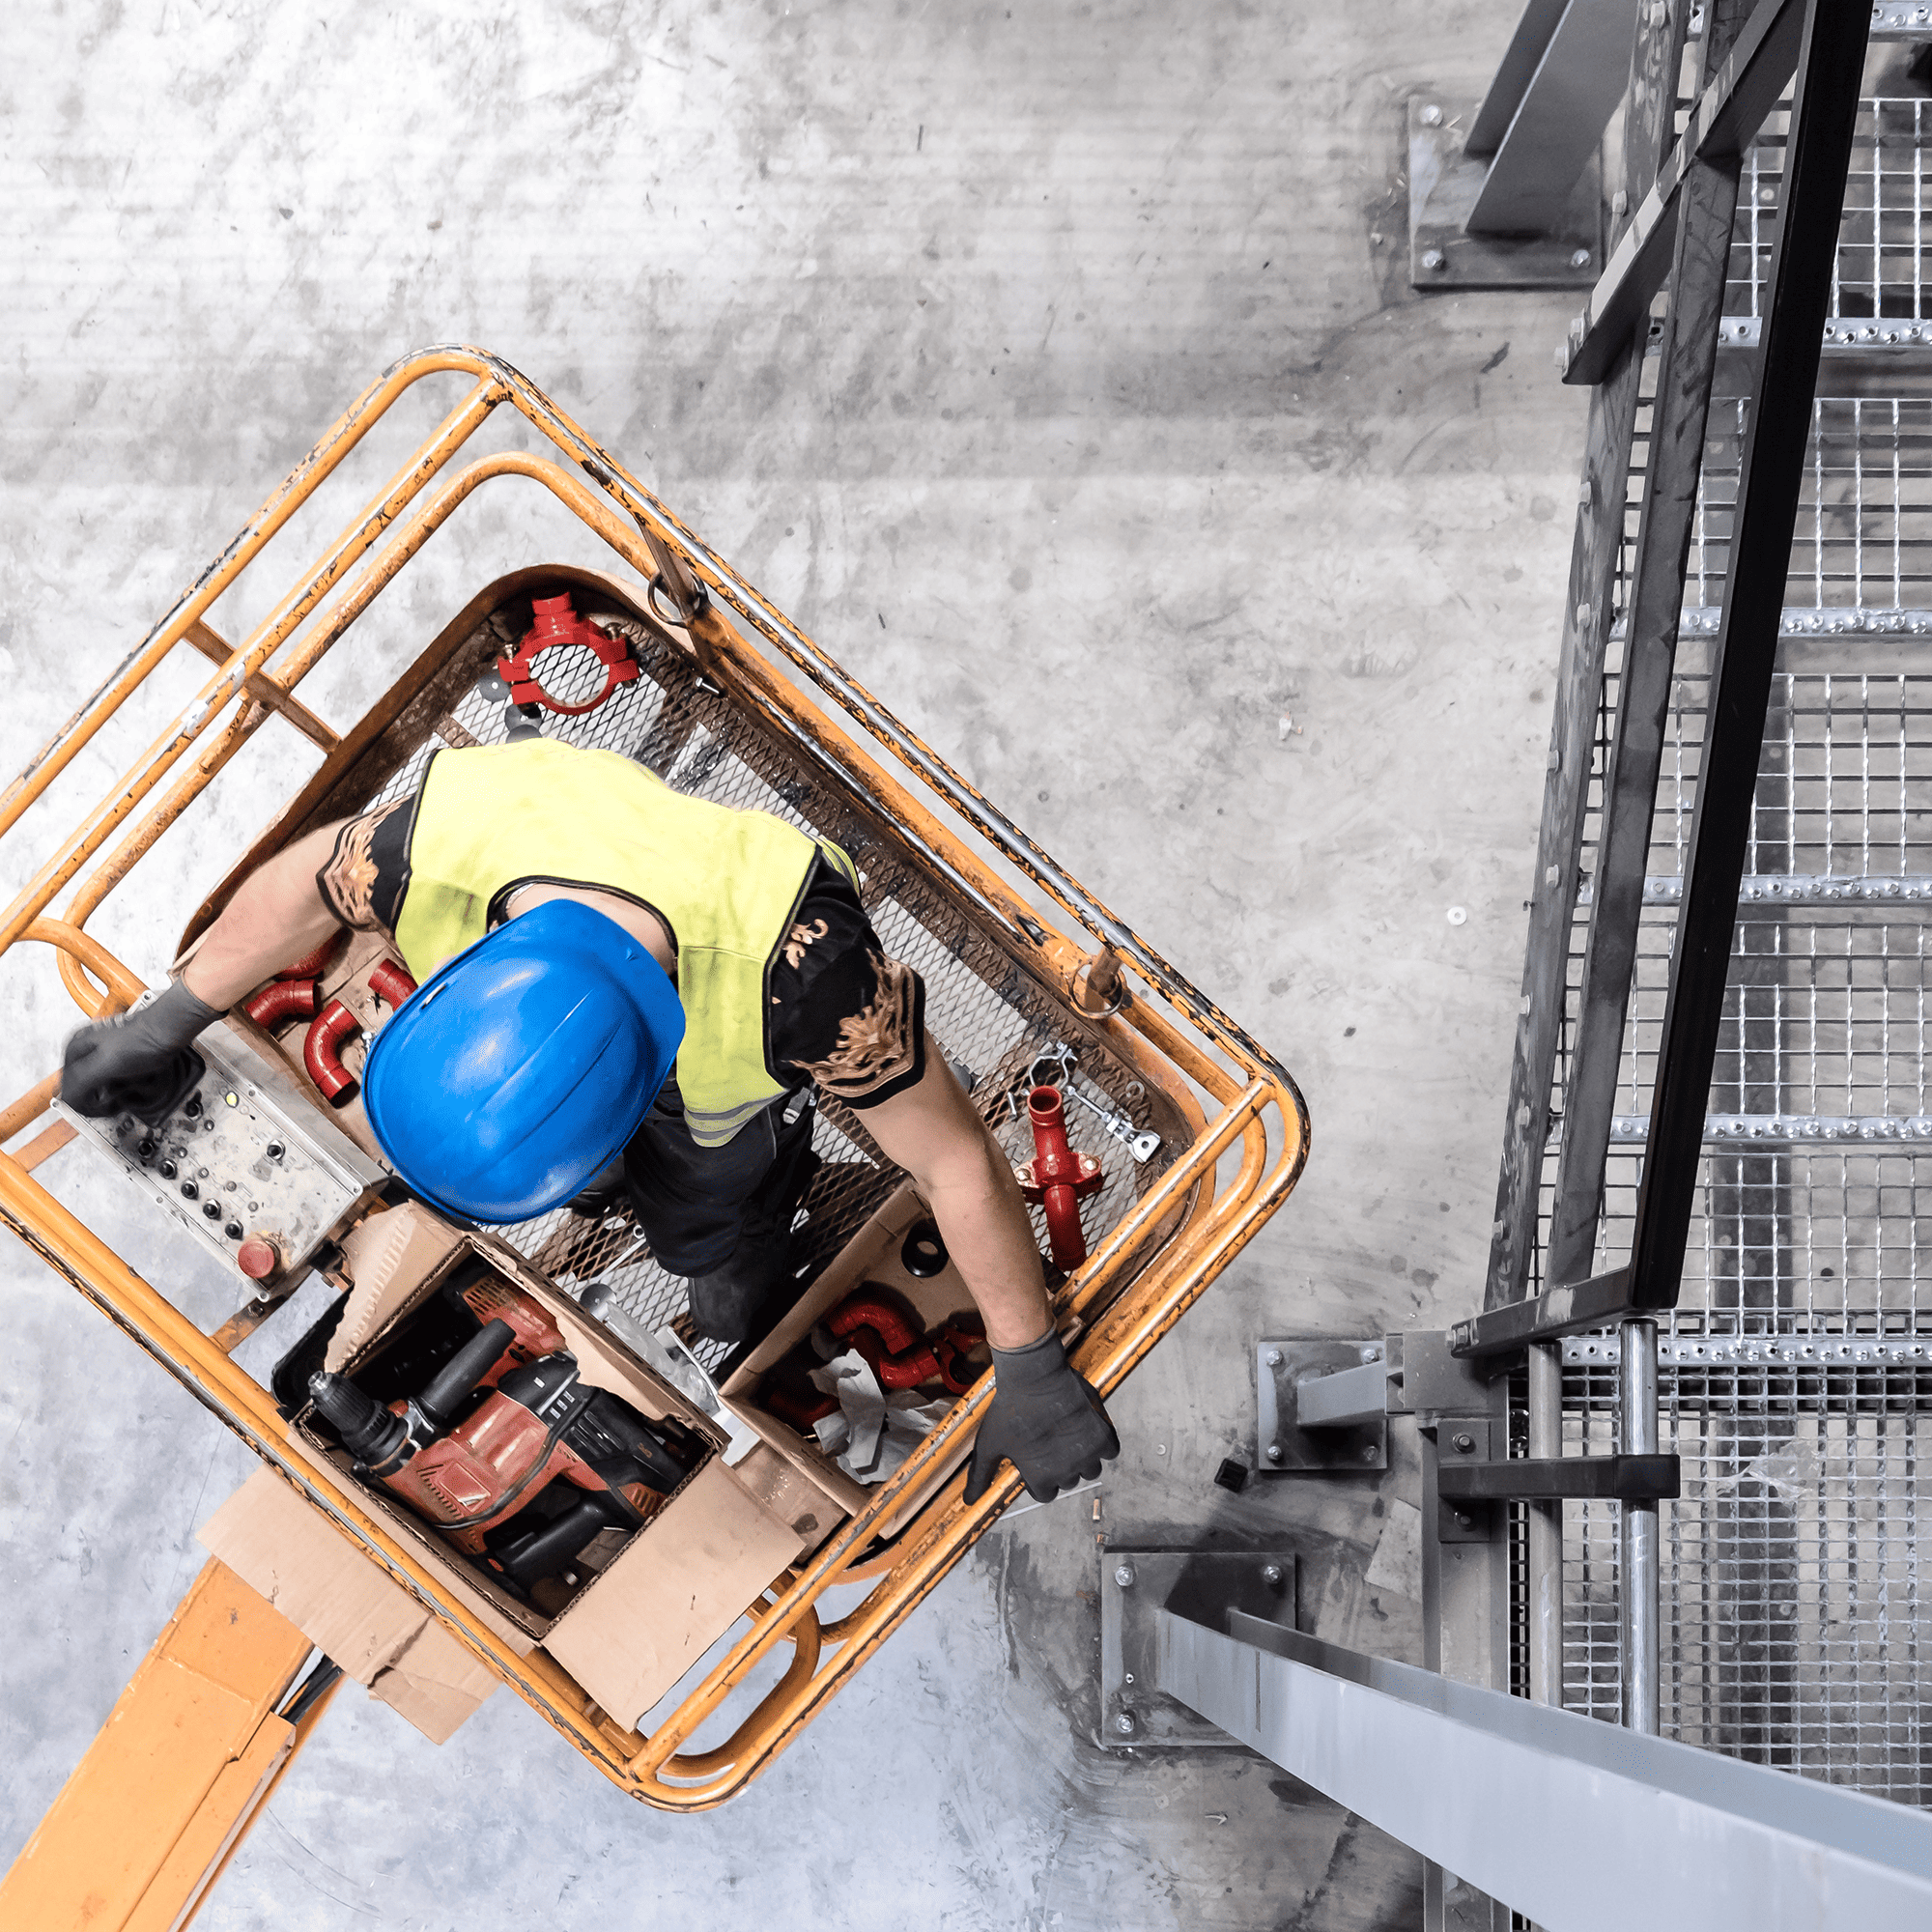 A worker in the basket of an extended boom lift on concrete